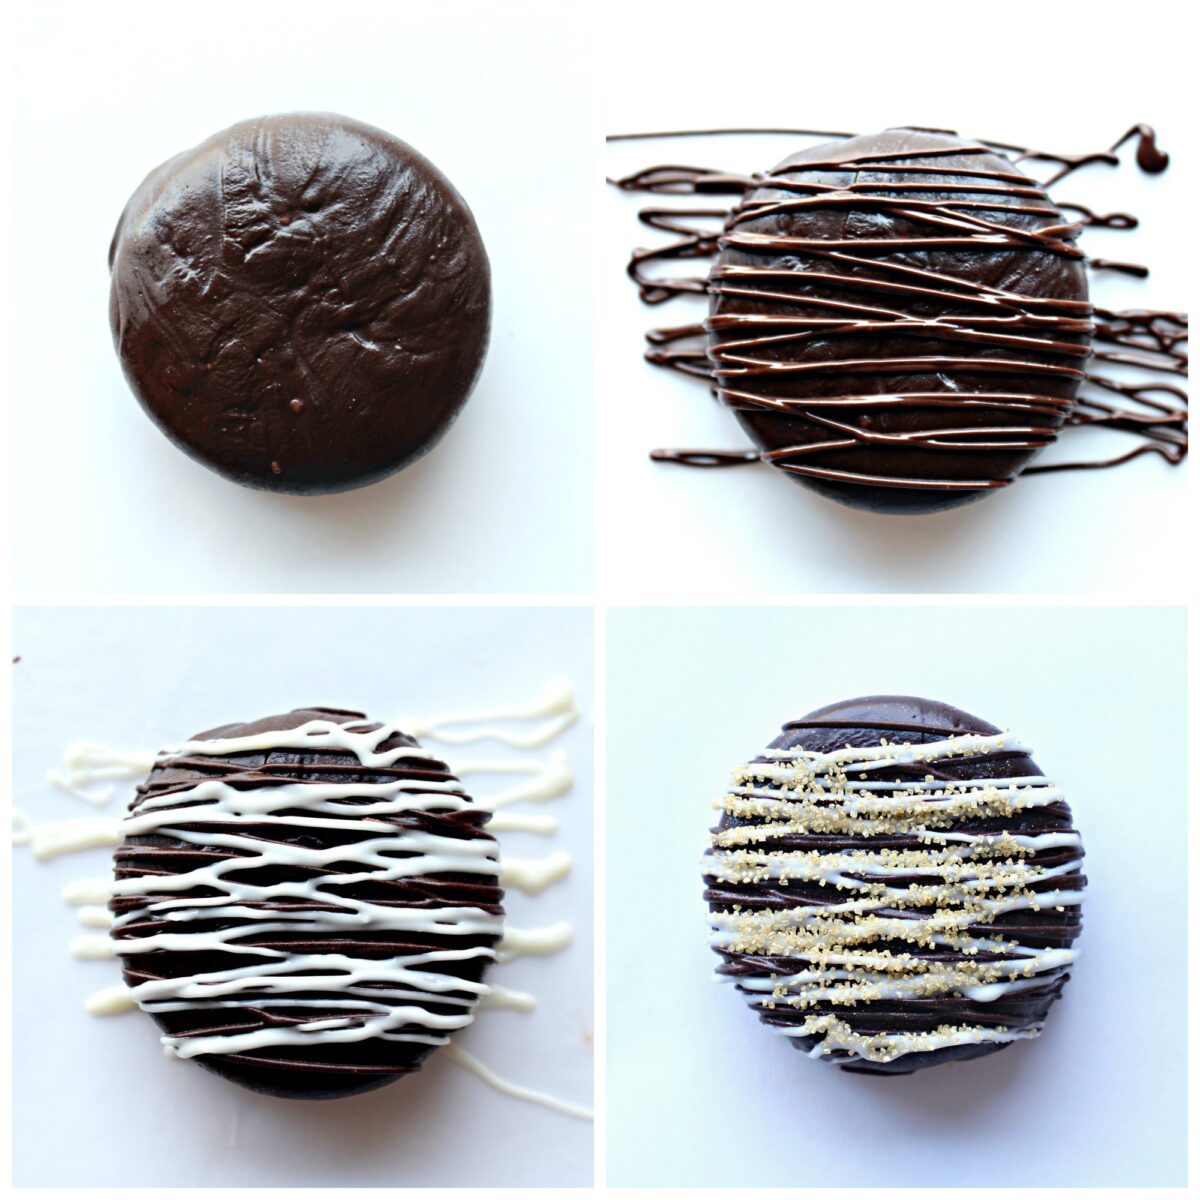 Instructions: drizzle with dark chocolate, drizzle with white chocolate, add gold sparkle sugar.